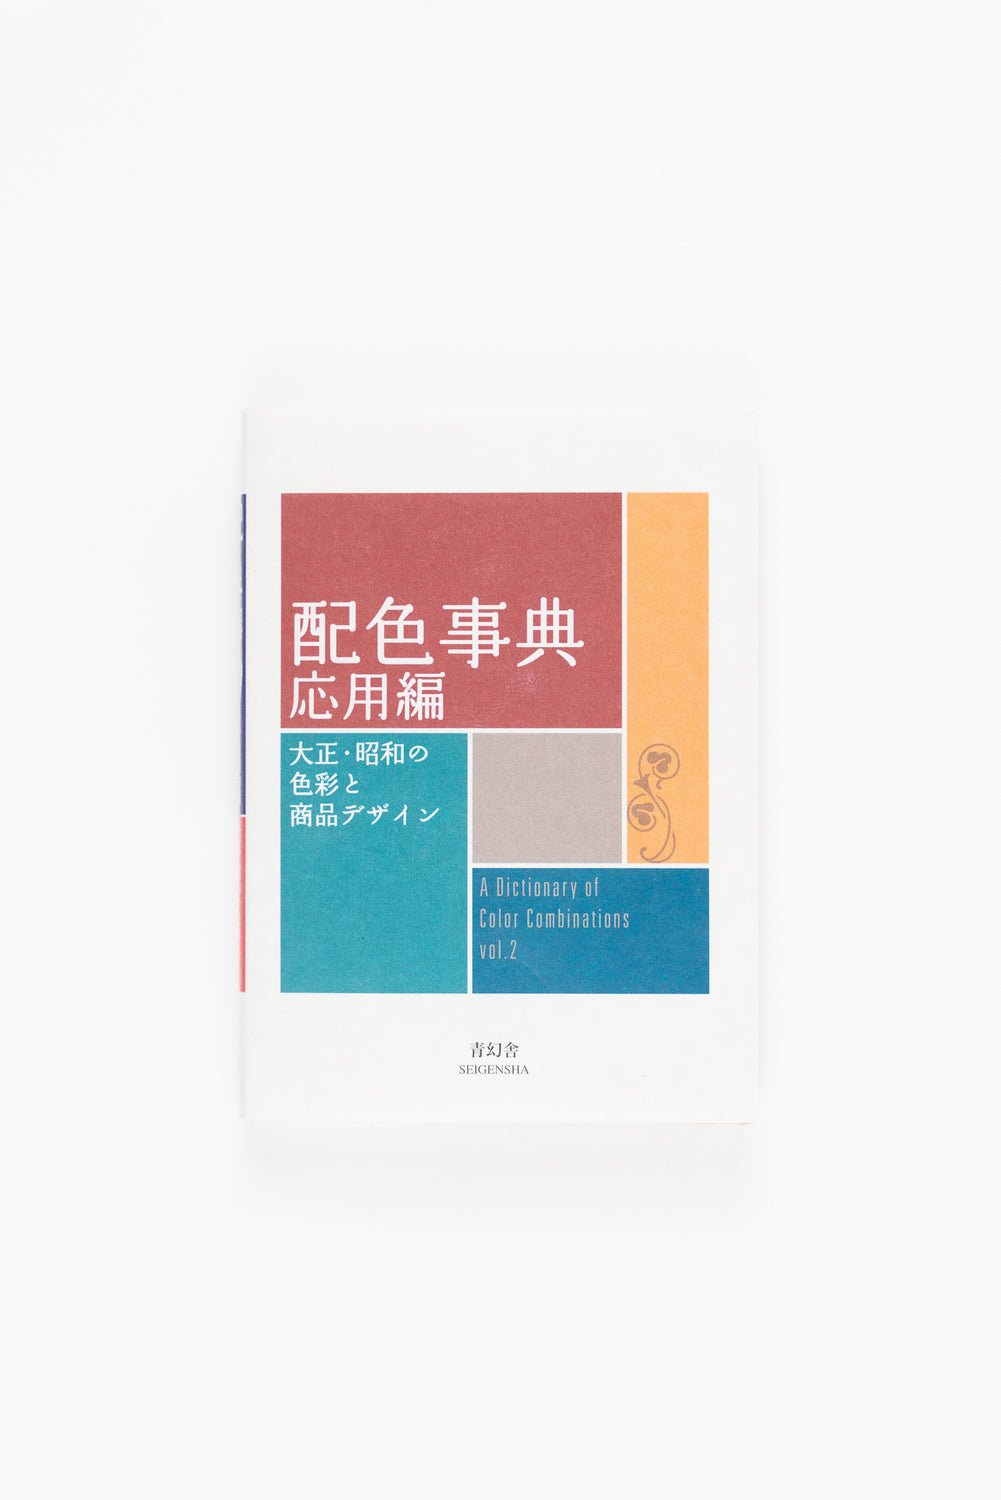 A Dictionary of Color Combinations – Sanzo Wada - All 348 Color Combos